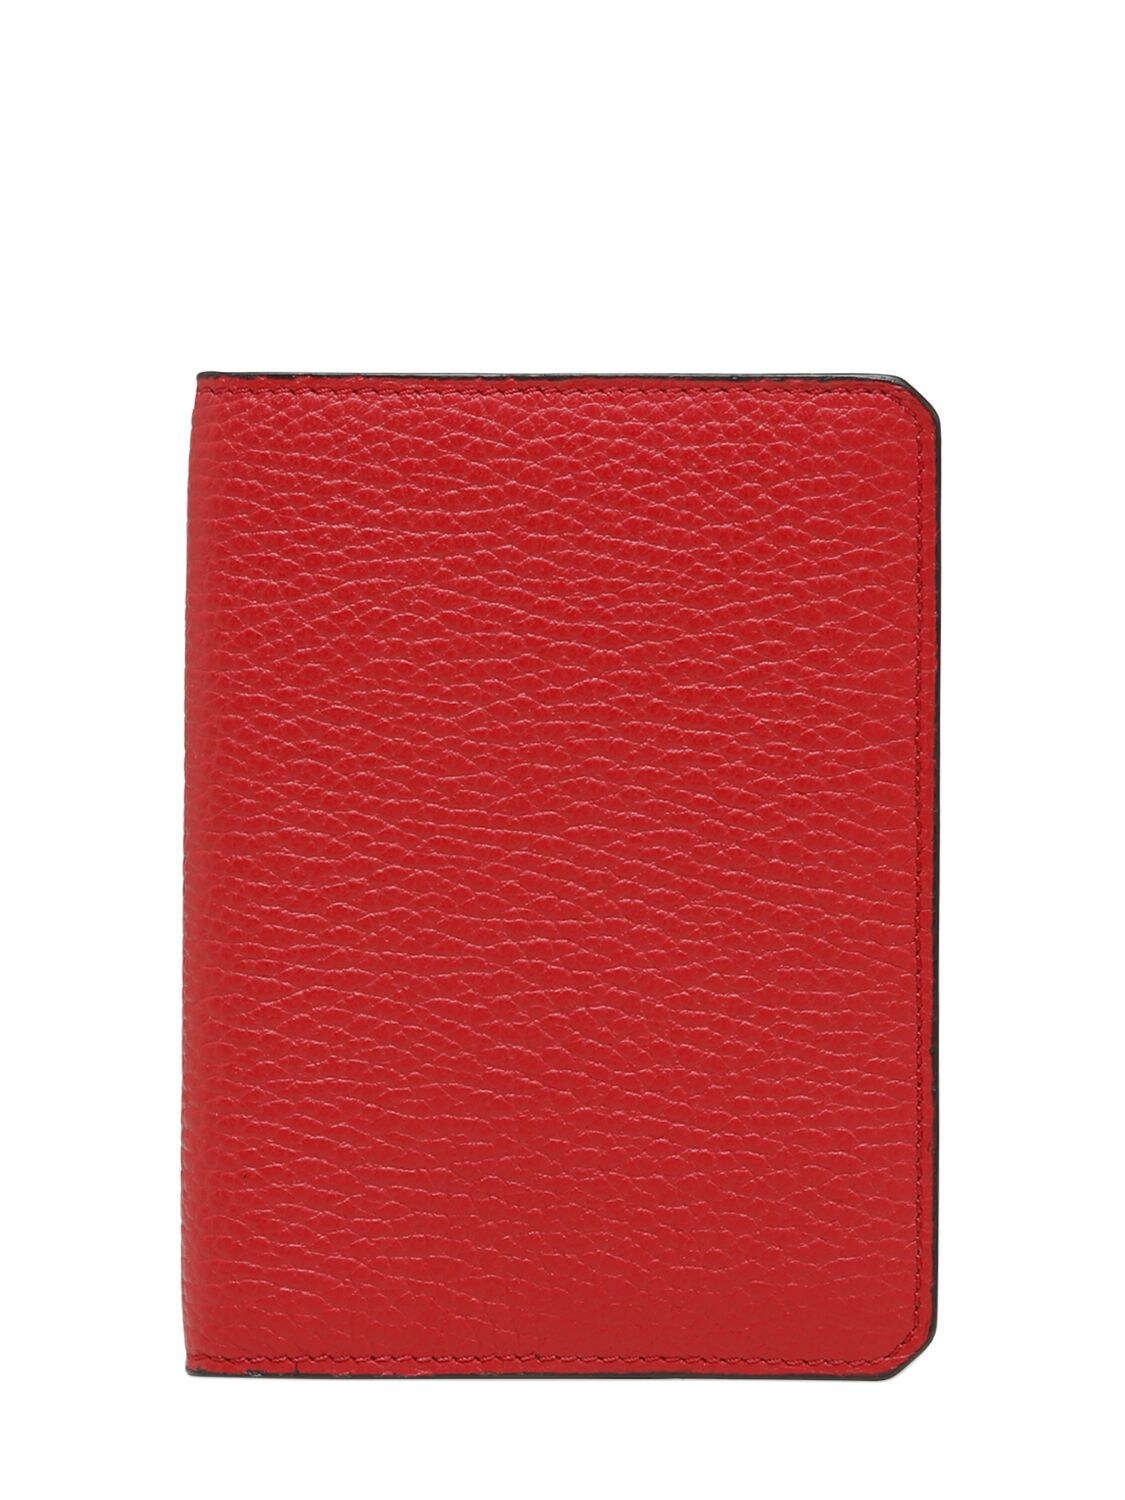 Aizea Soft Leather Passport Holder In Red